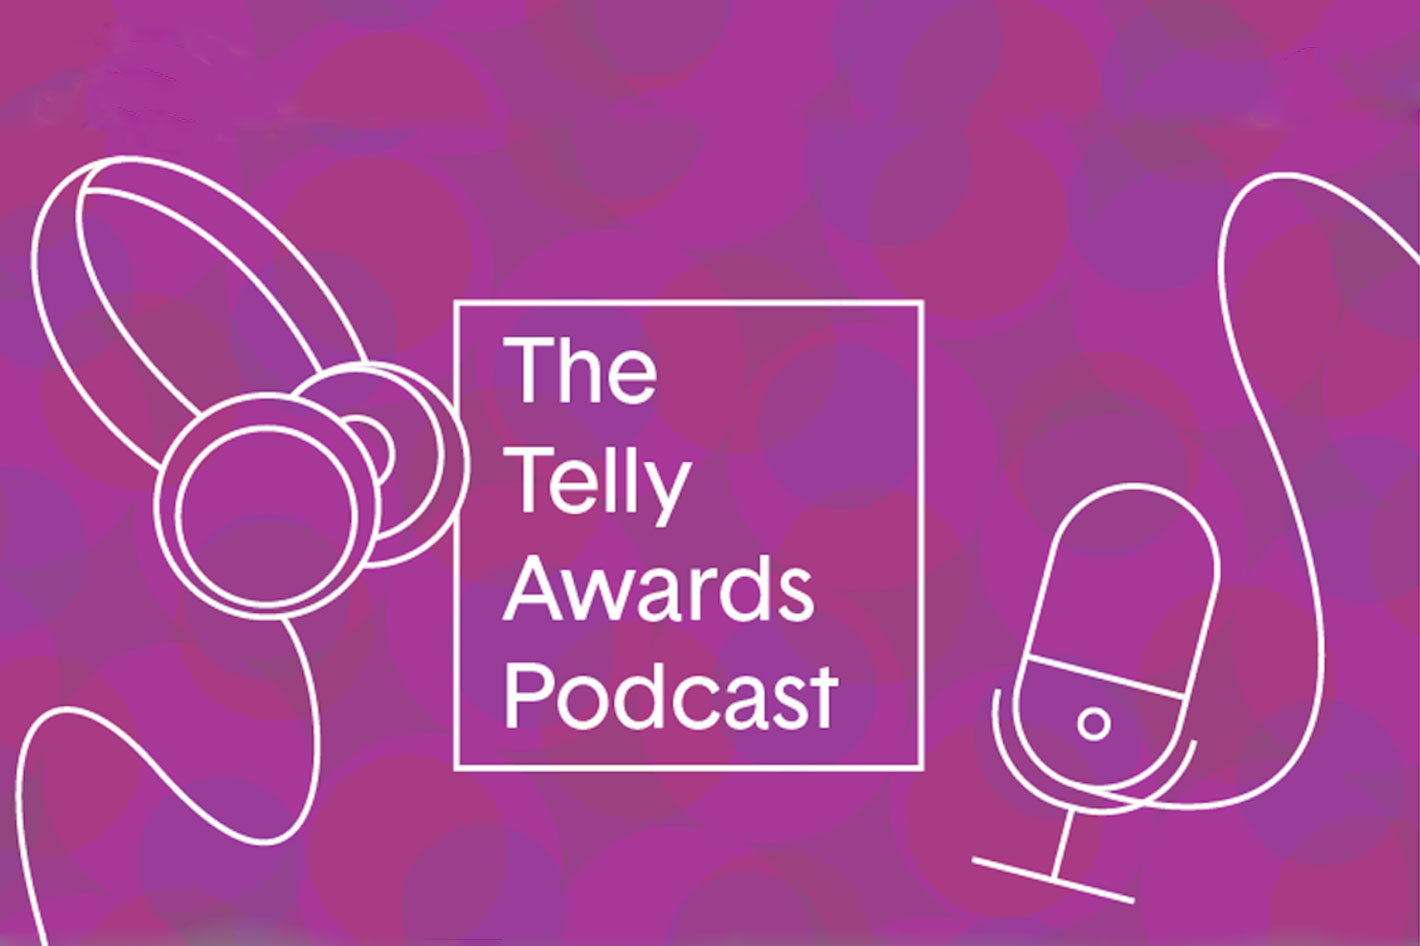 The Telly Awards returns with new categories